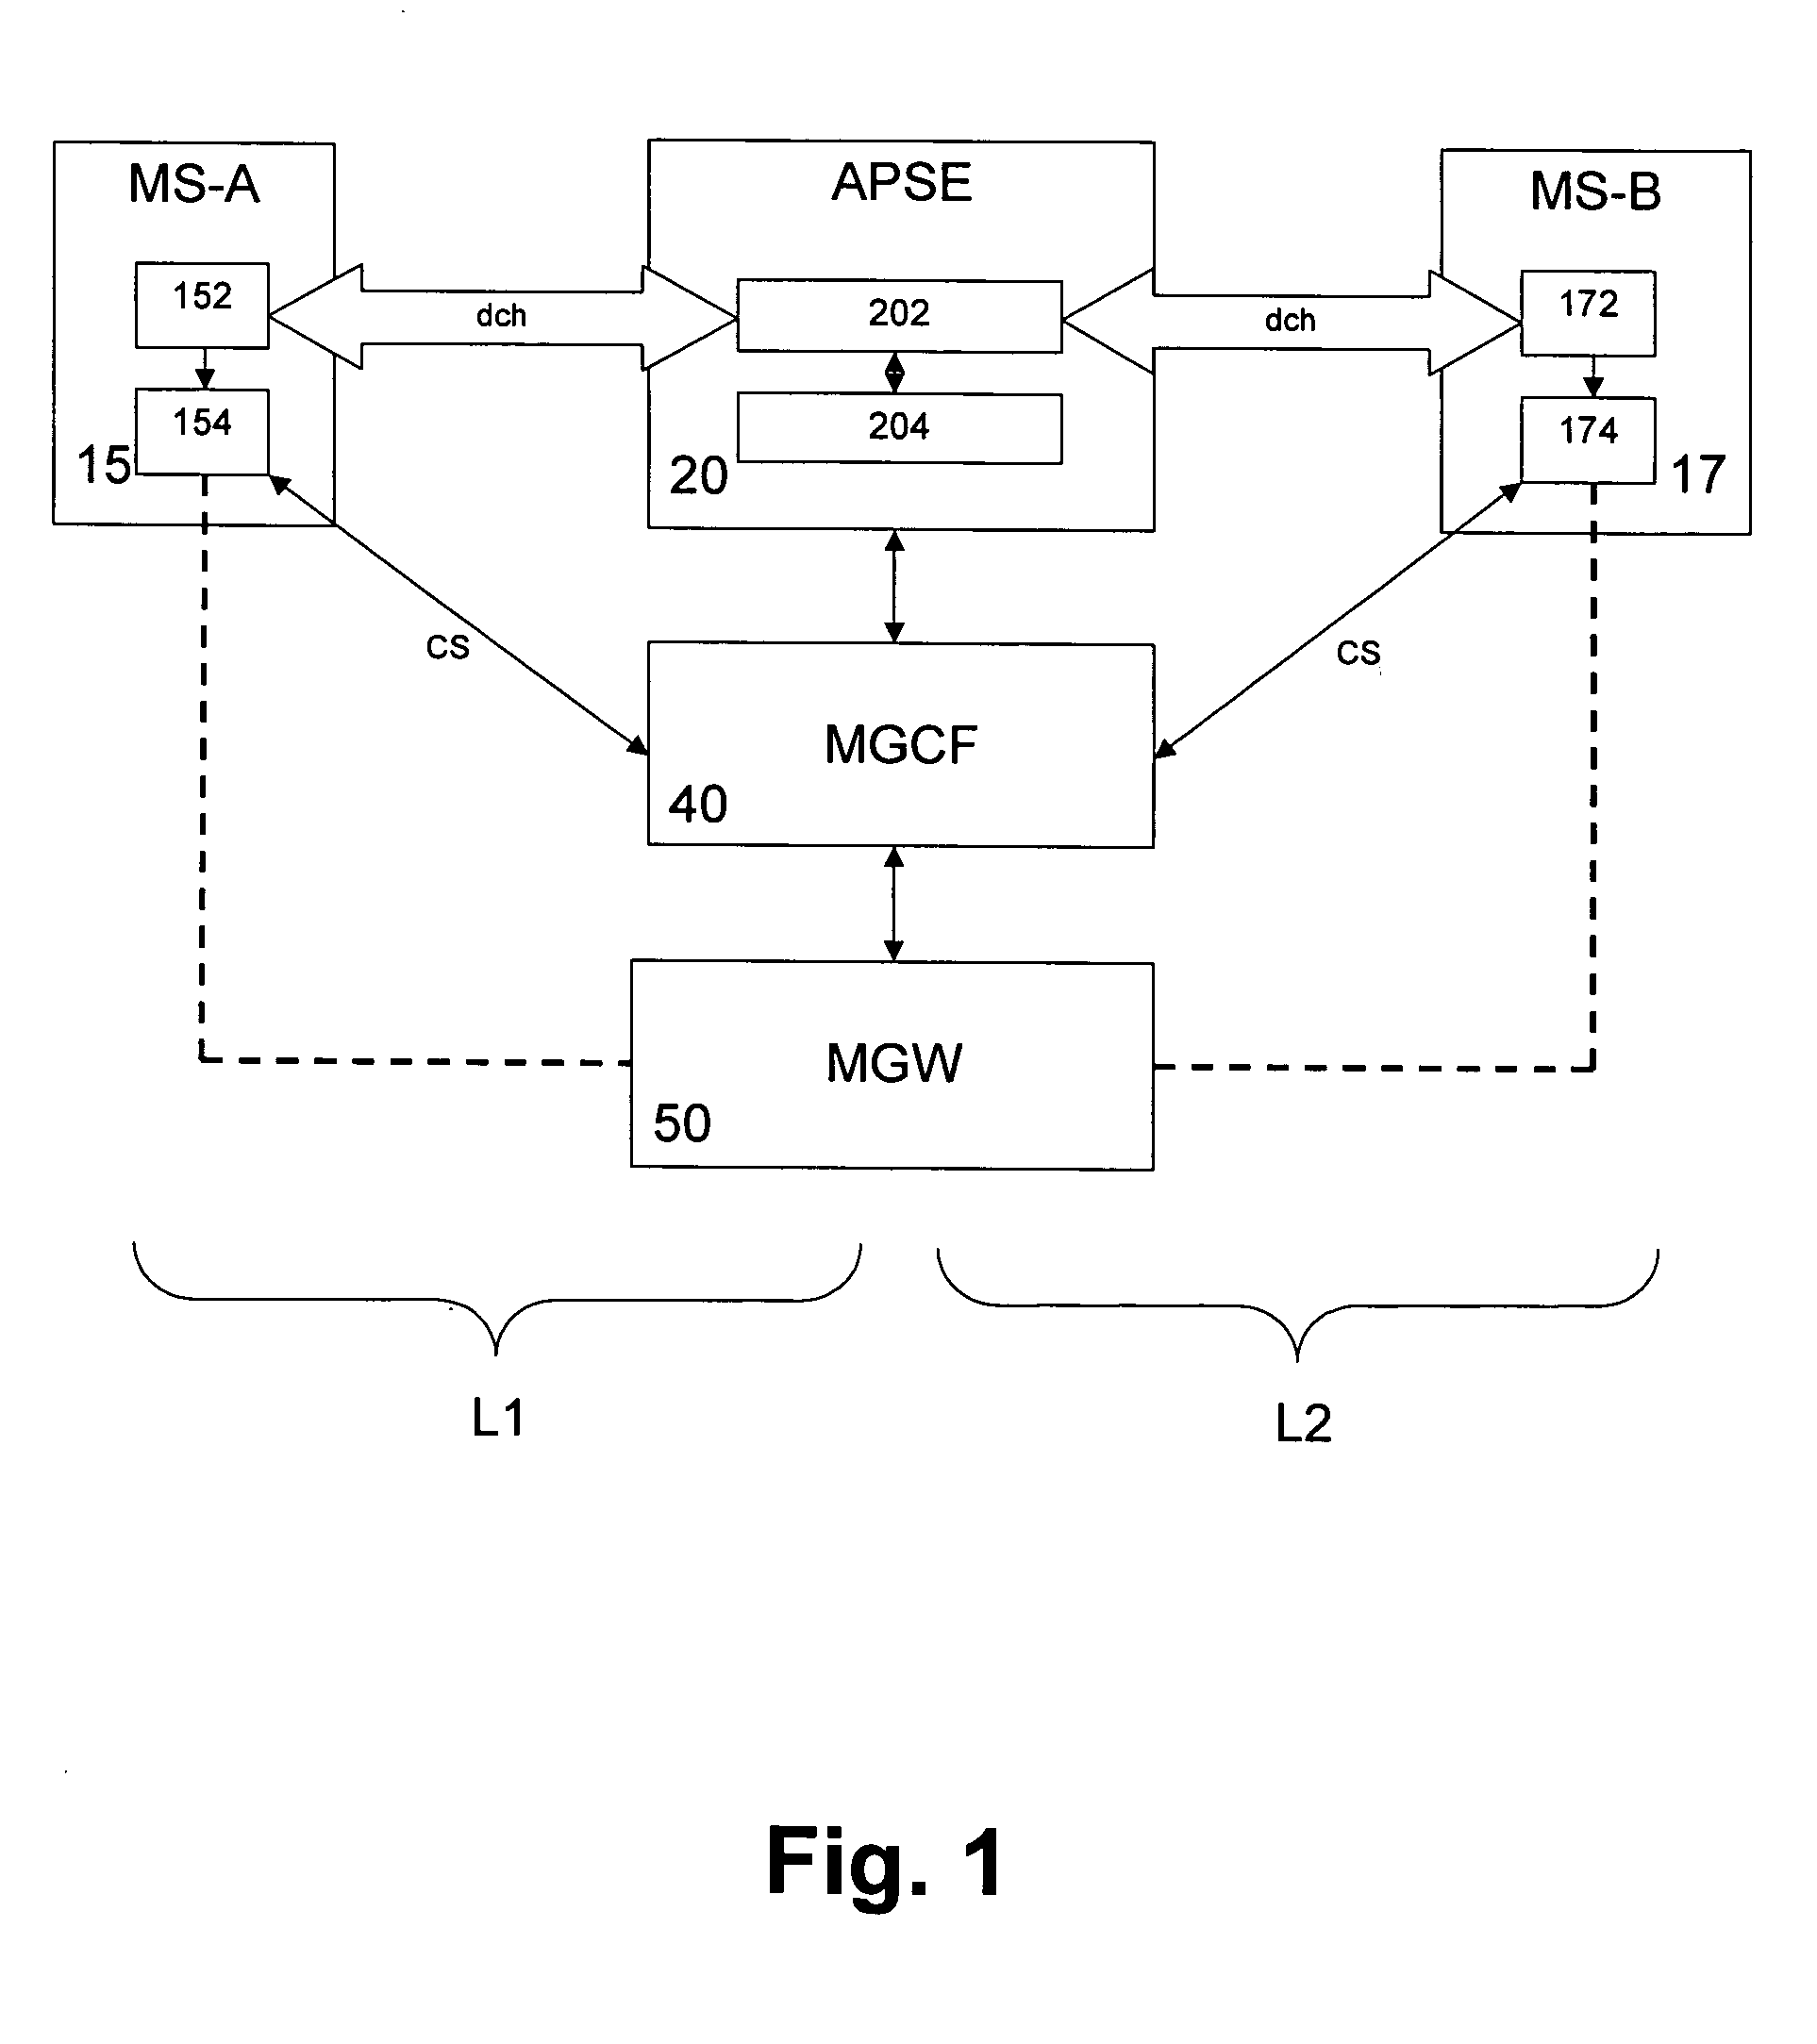 IP-based services for circuit-switched networks